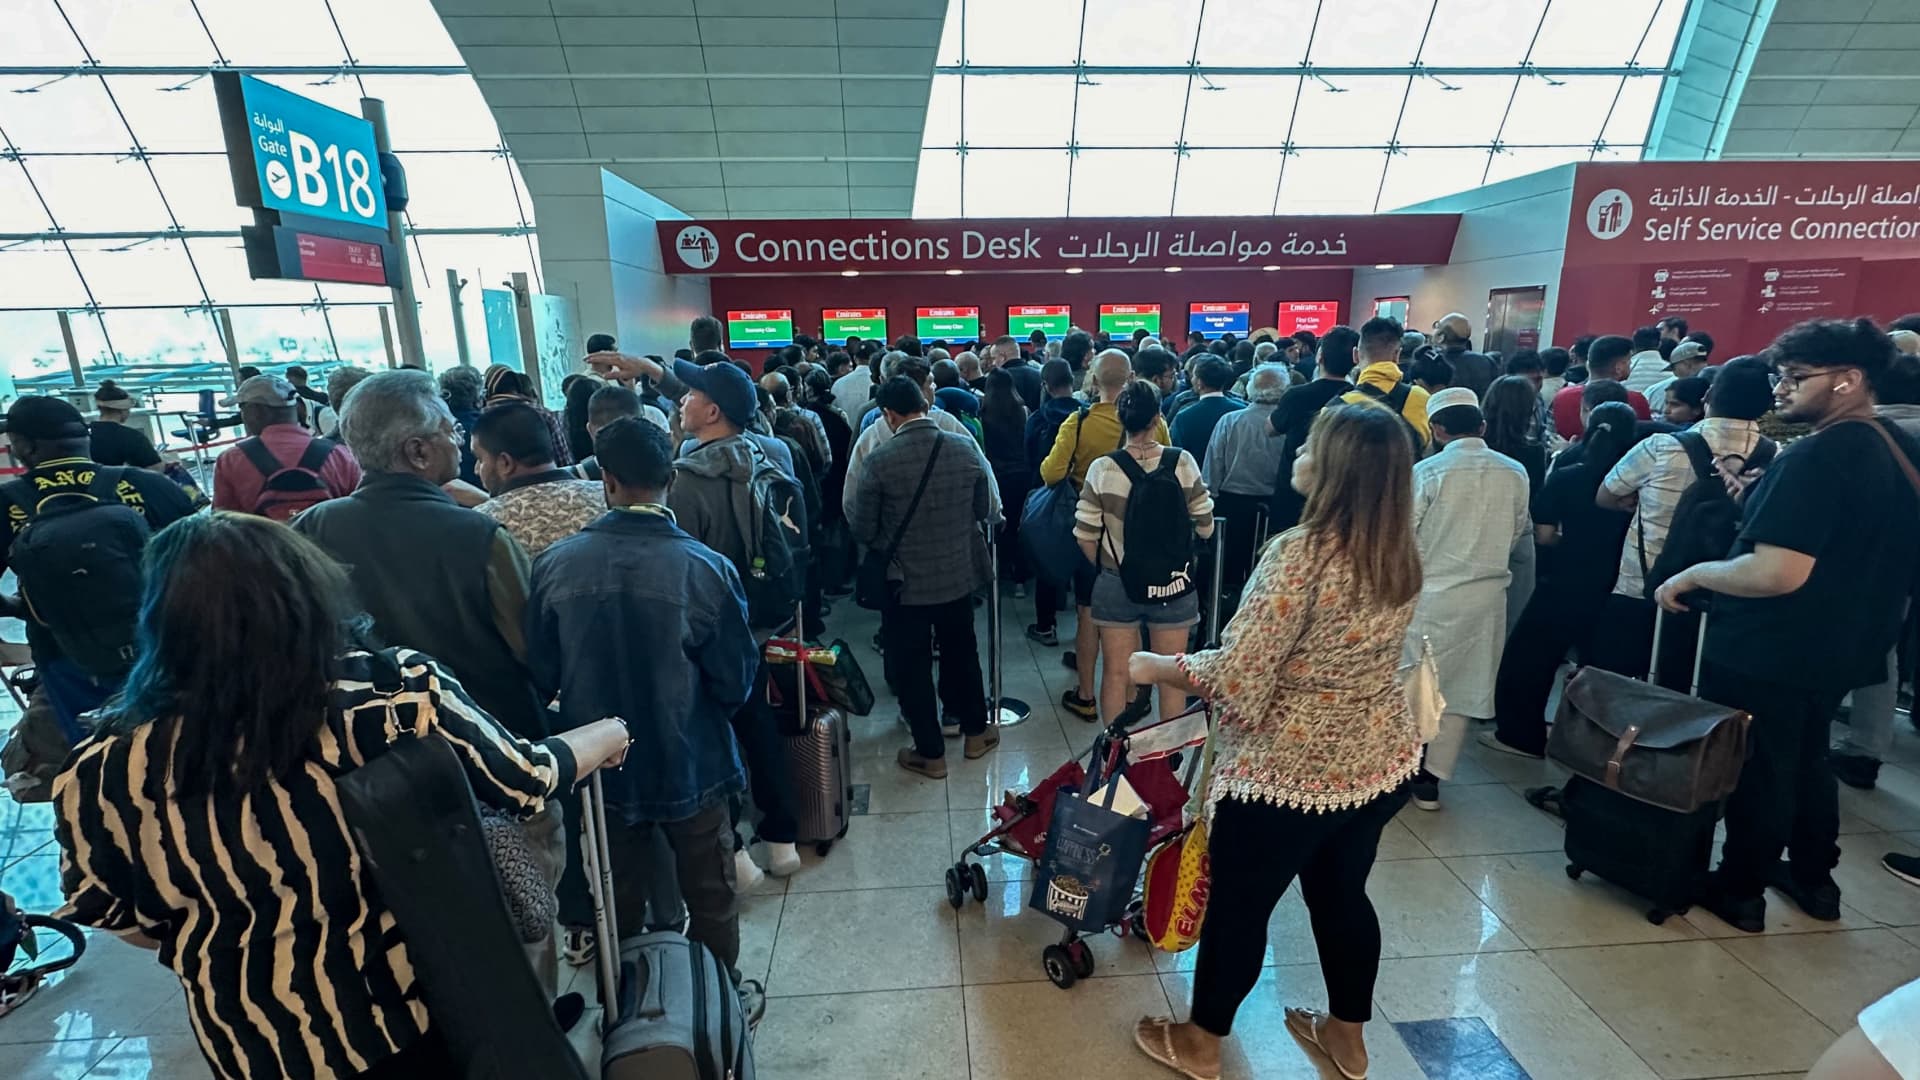 Dubai Airports expects passenger traffic to top 100 million by 2027: CEO [Video]